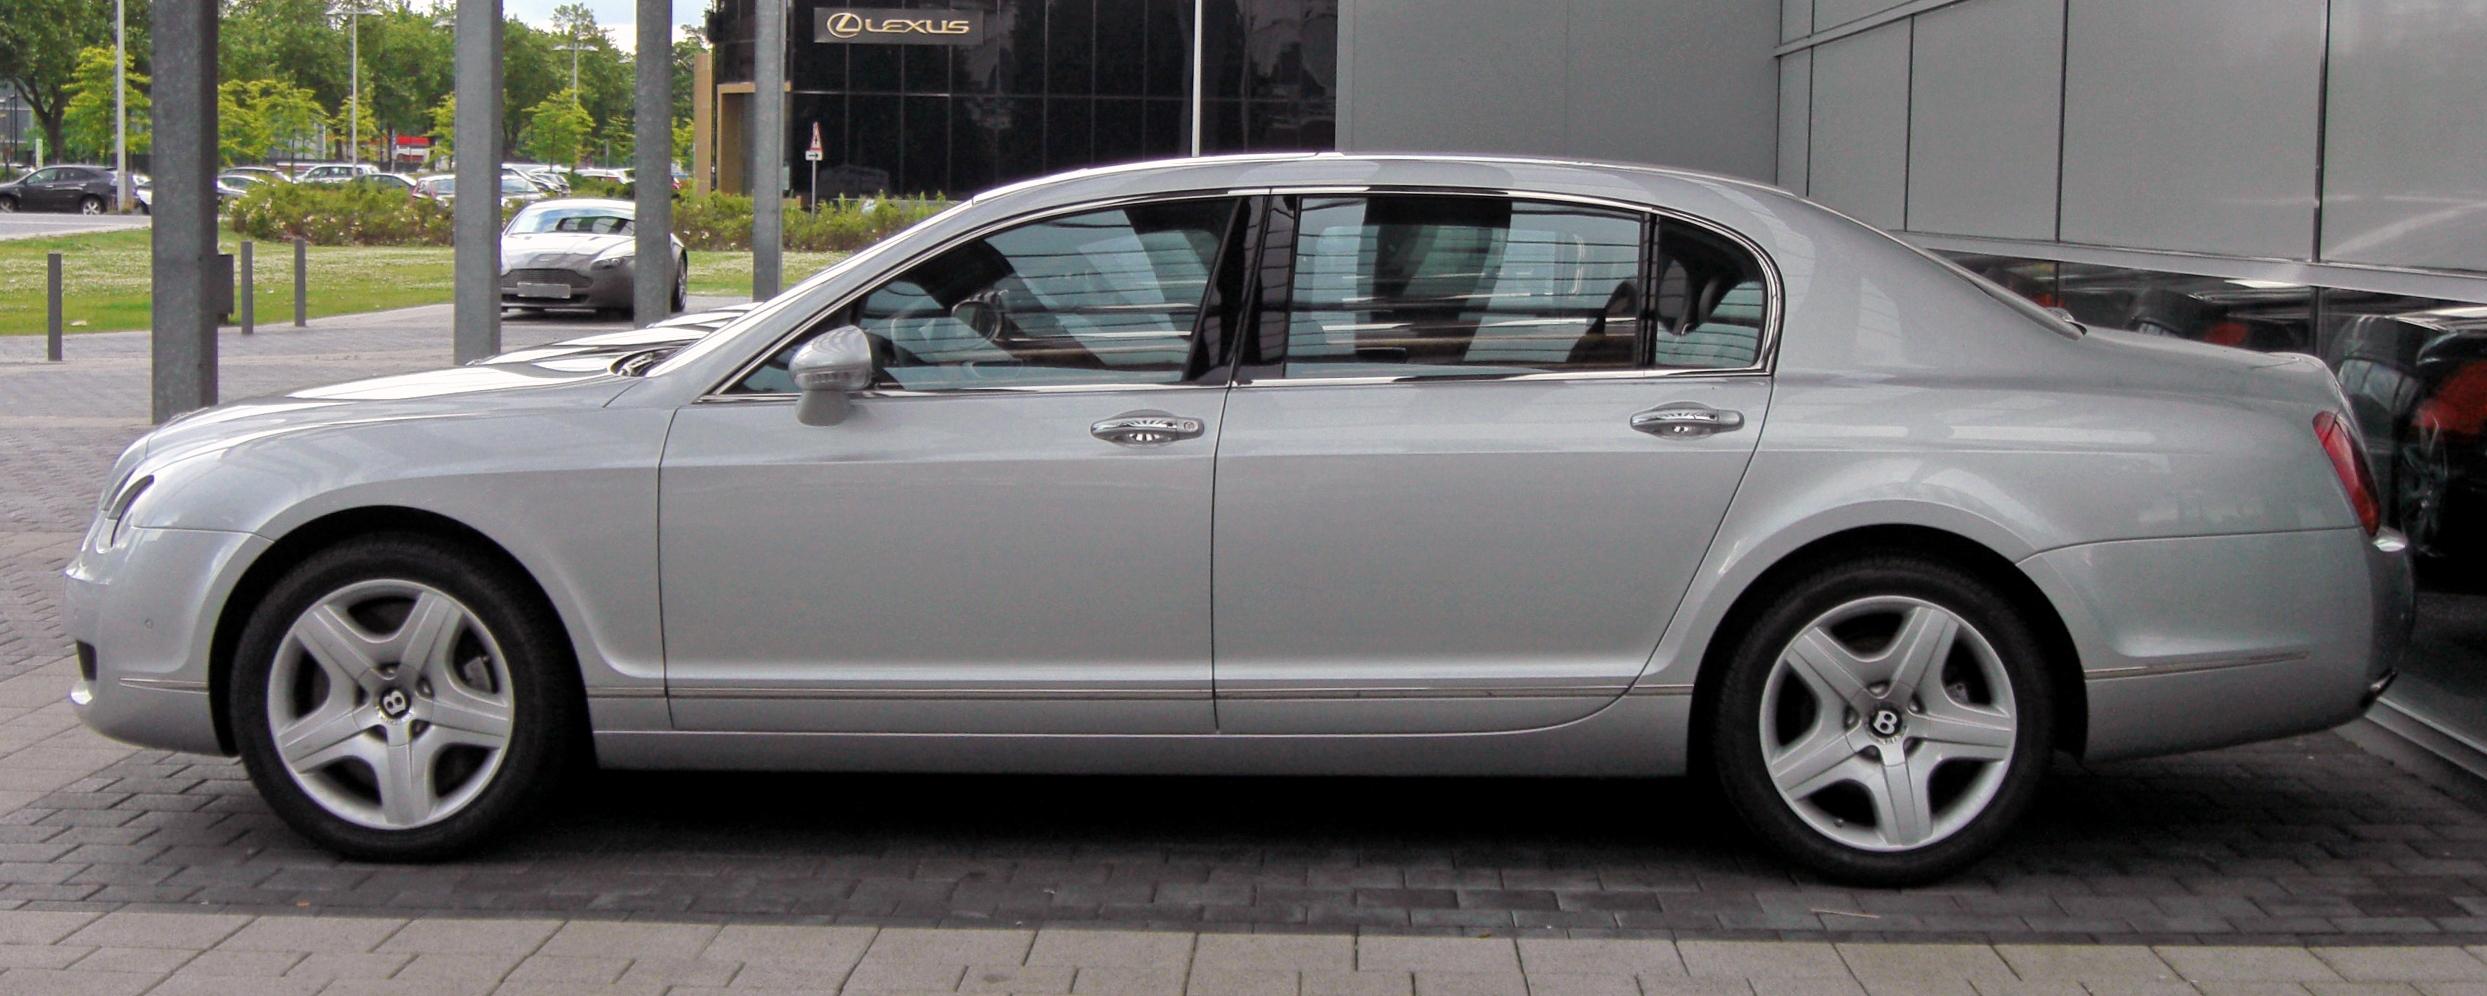 Bentley Continental Flying Spur exterior - Side Profile